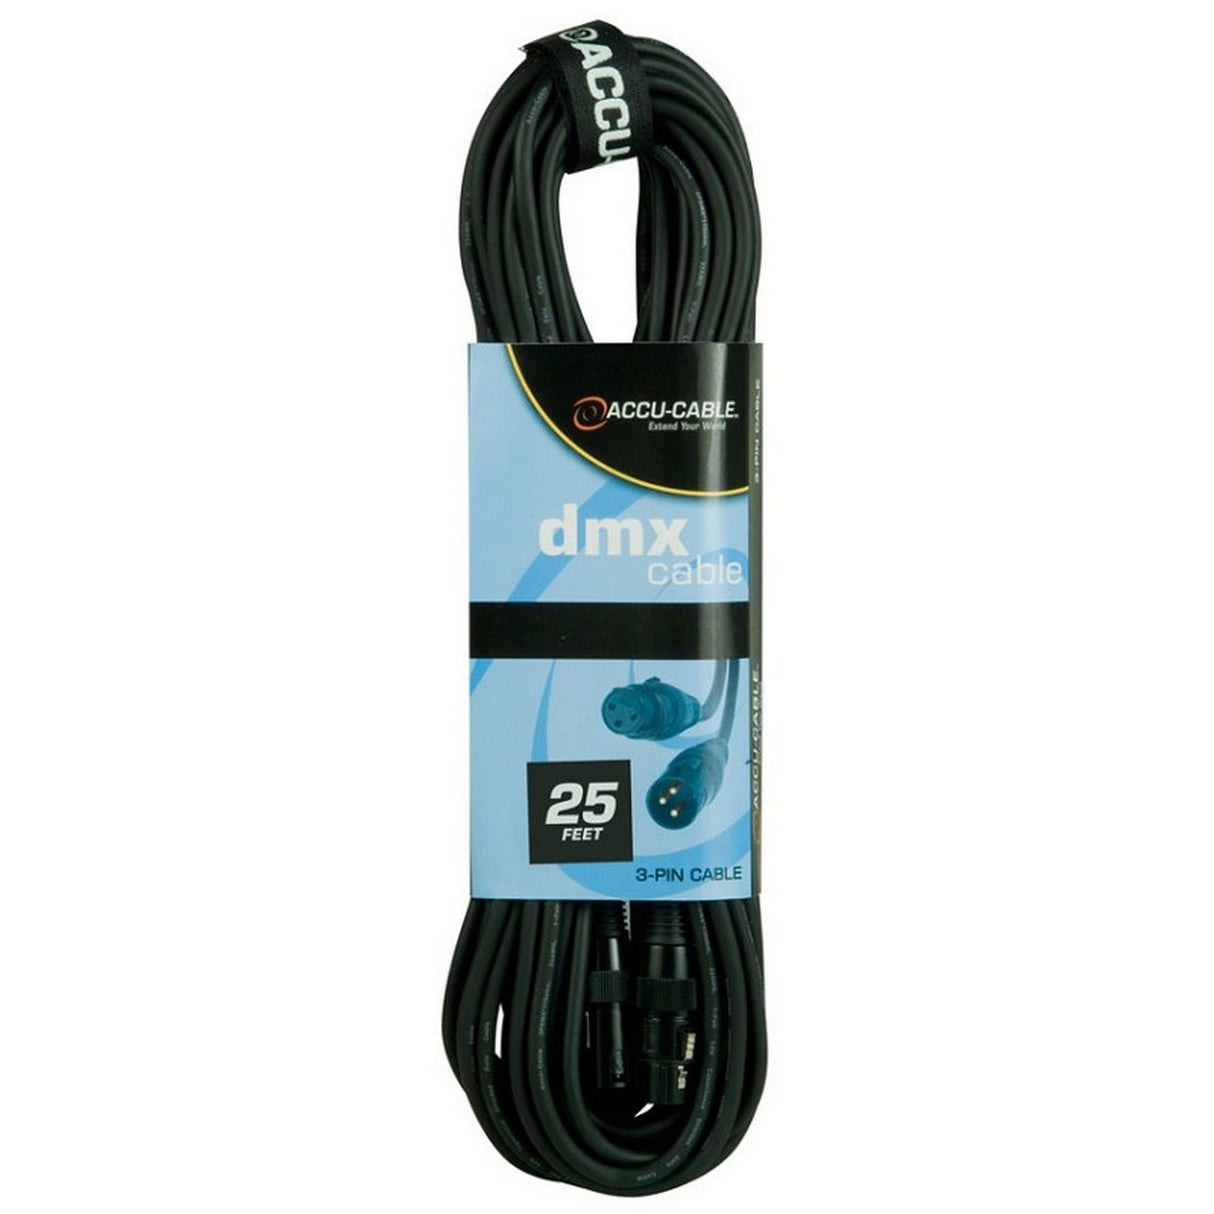 Accu Cable AC3PDMX25 | 25ft 3 Pin DMX Cable